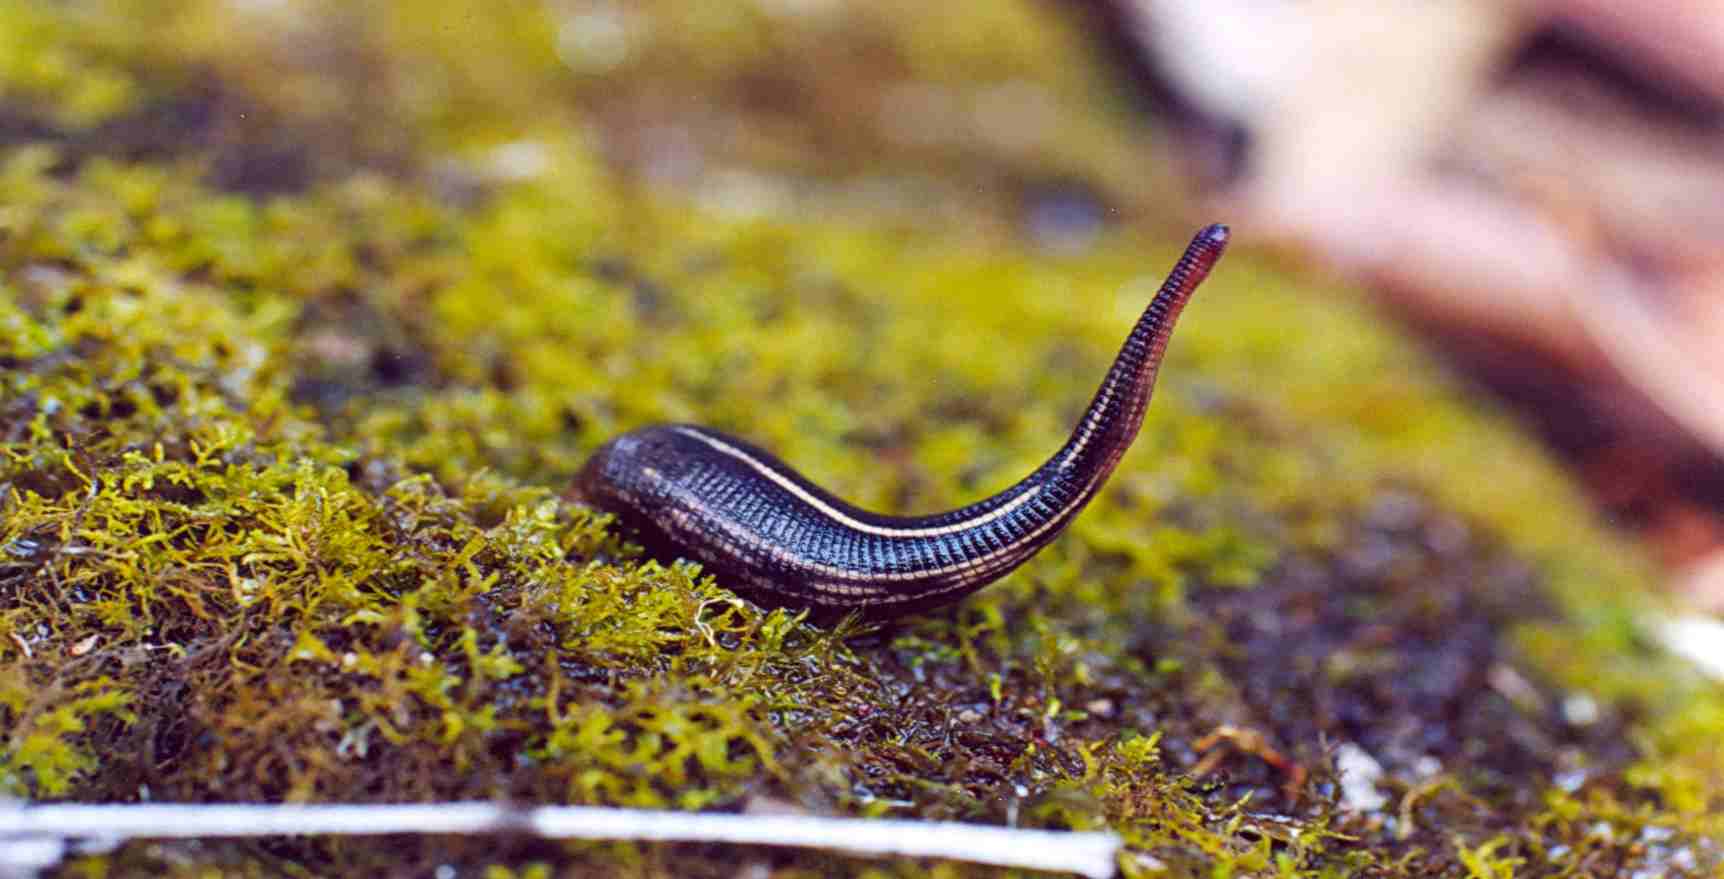 Background and detection of leech characteristics